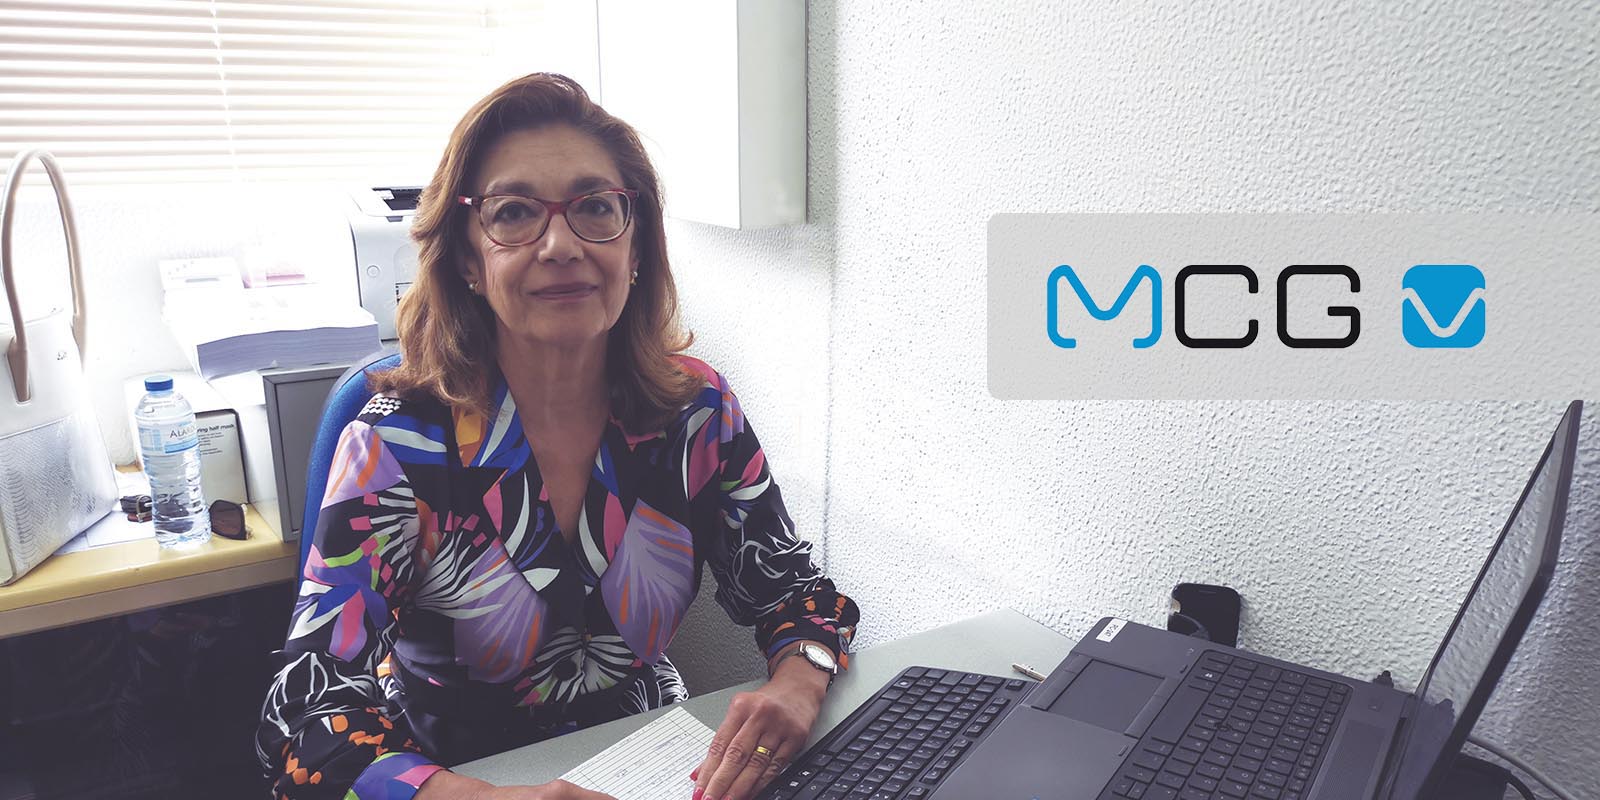 Dr. Clotilde Dimas: ‘MCG has been very committed to maintain the health of its Employees.’ MCG